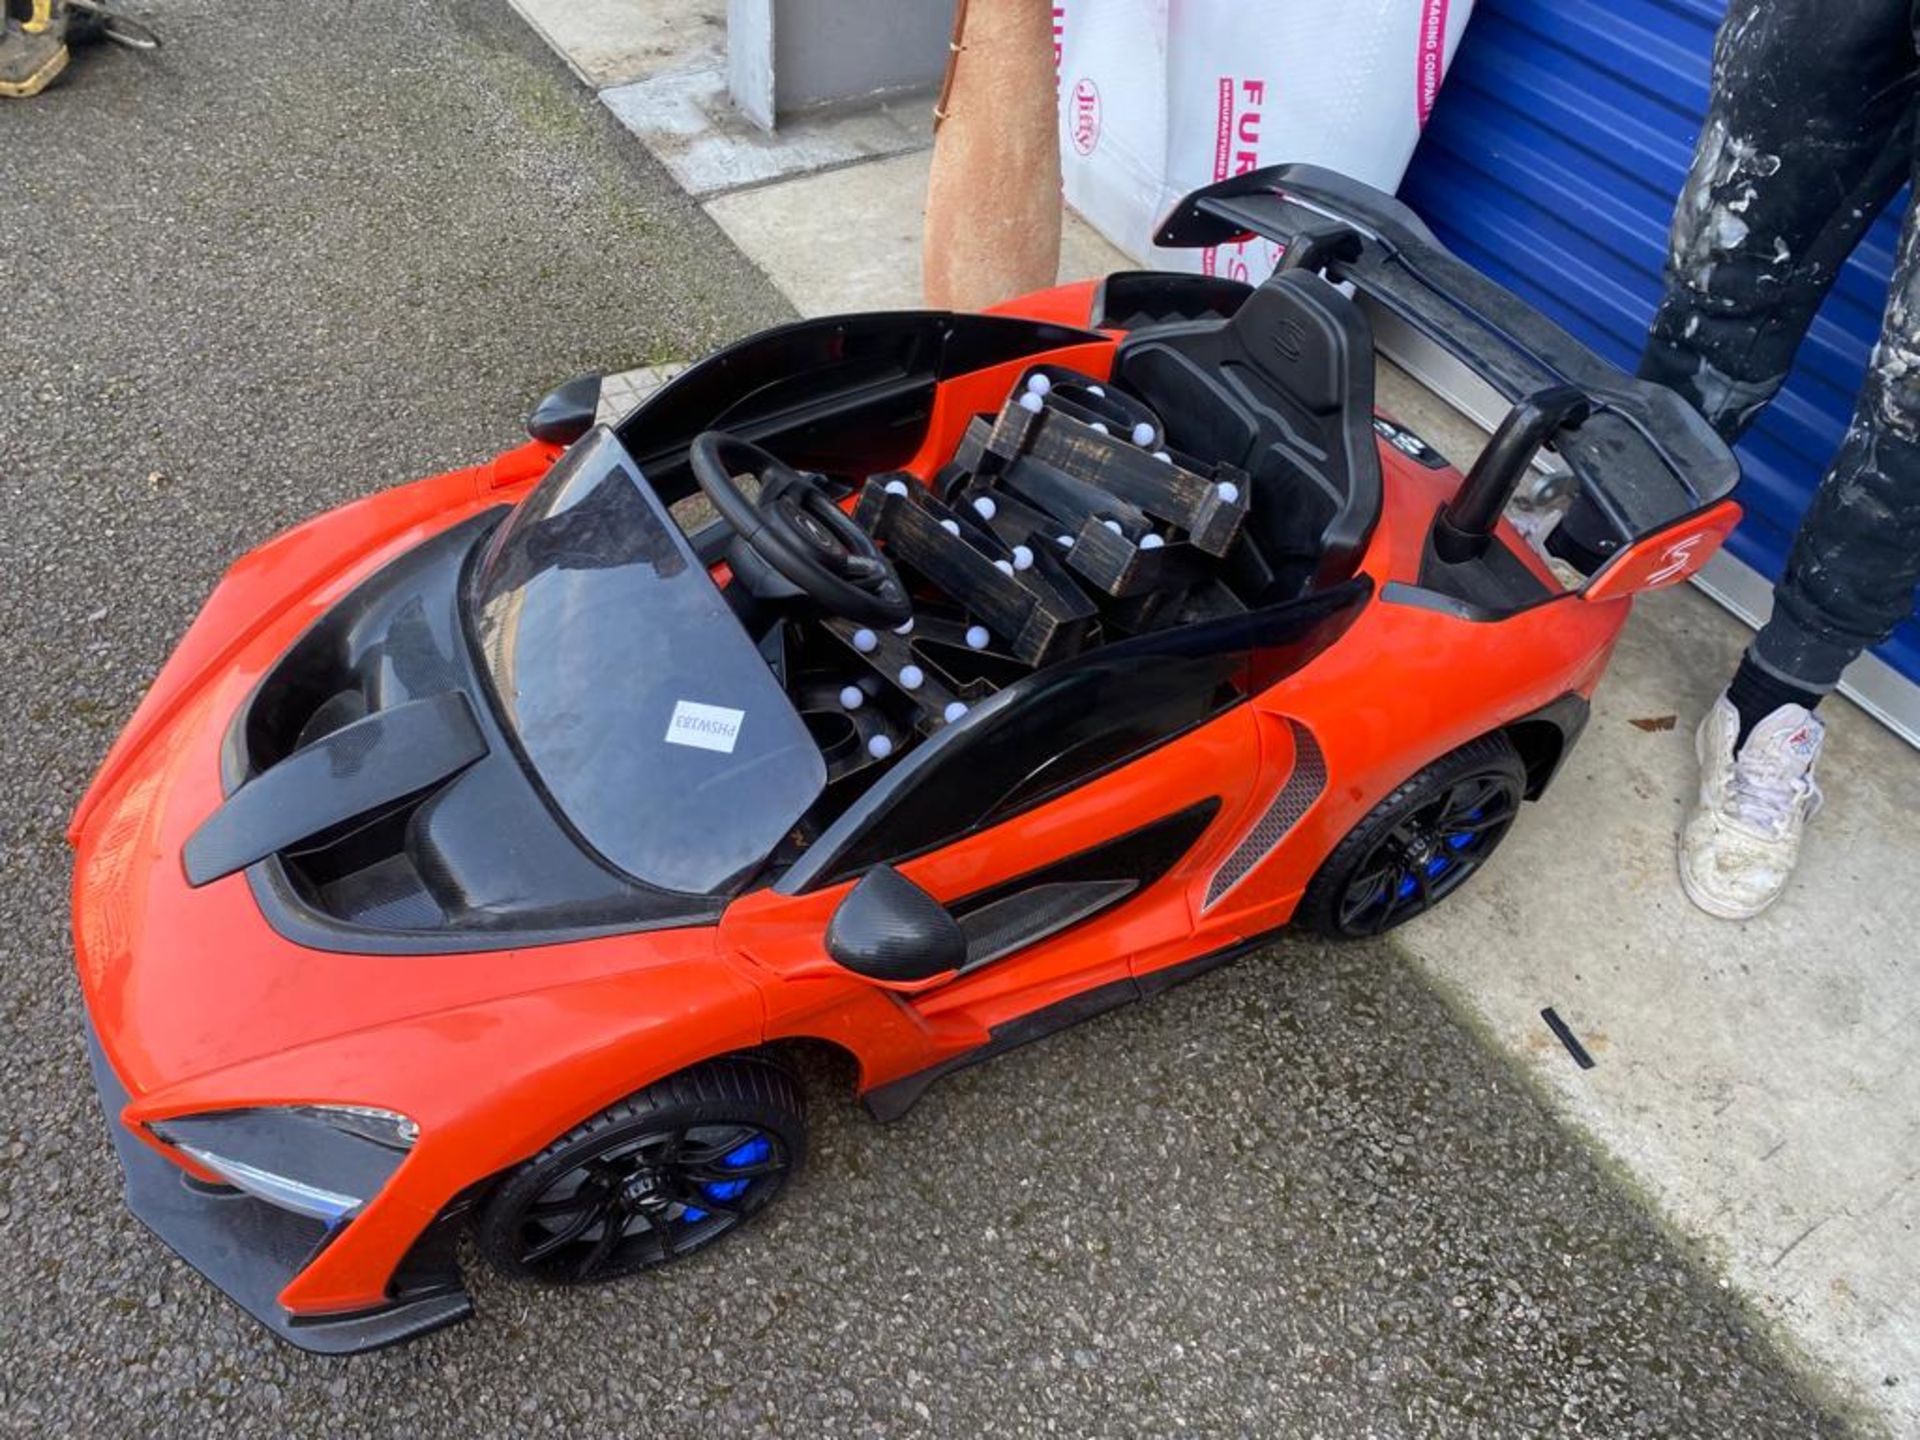 1 x McLaren Ride On Children's Car in Red/Black - Rechargeable - Image 2 of 2